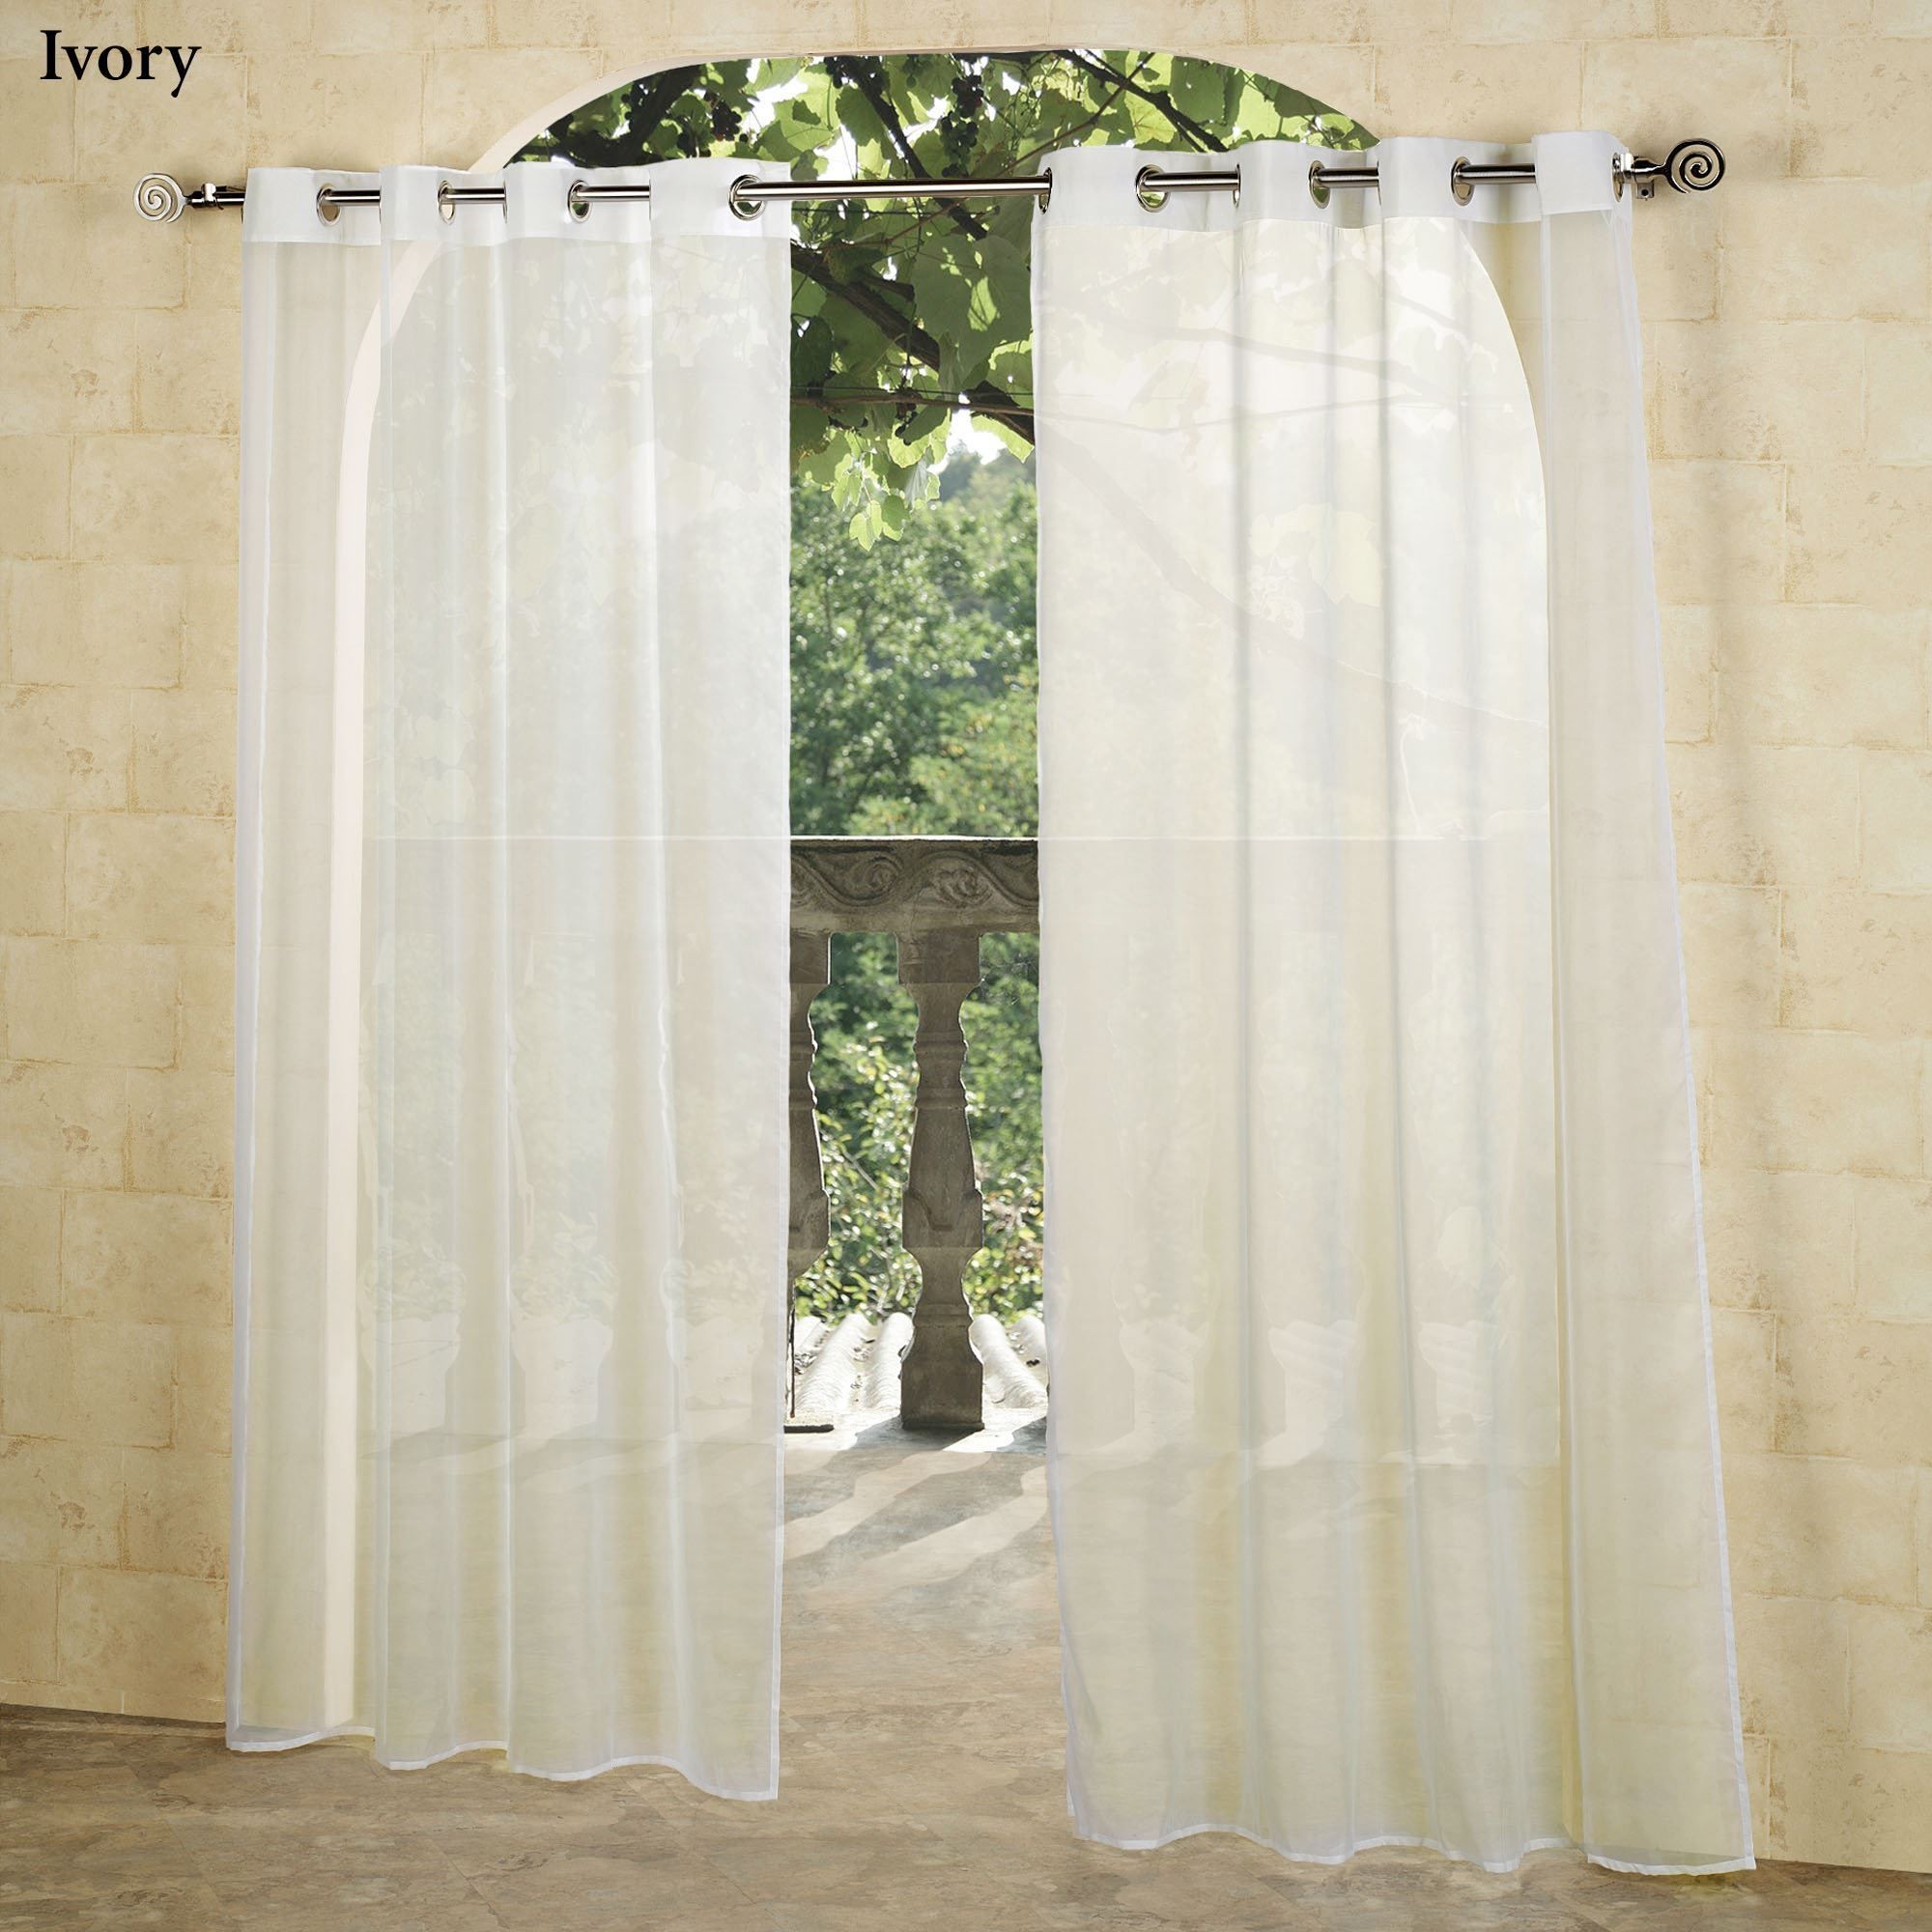 Escape Outdoor Sheer Grommet Panels Within Sheer Grommet Curtain Panels (View 16 of 25)